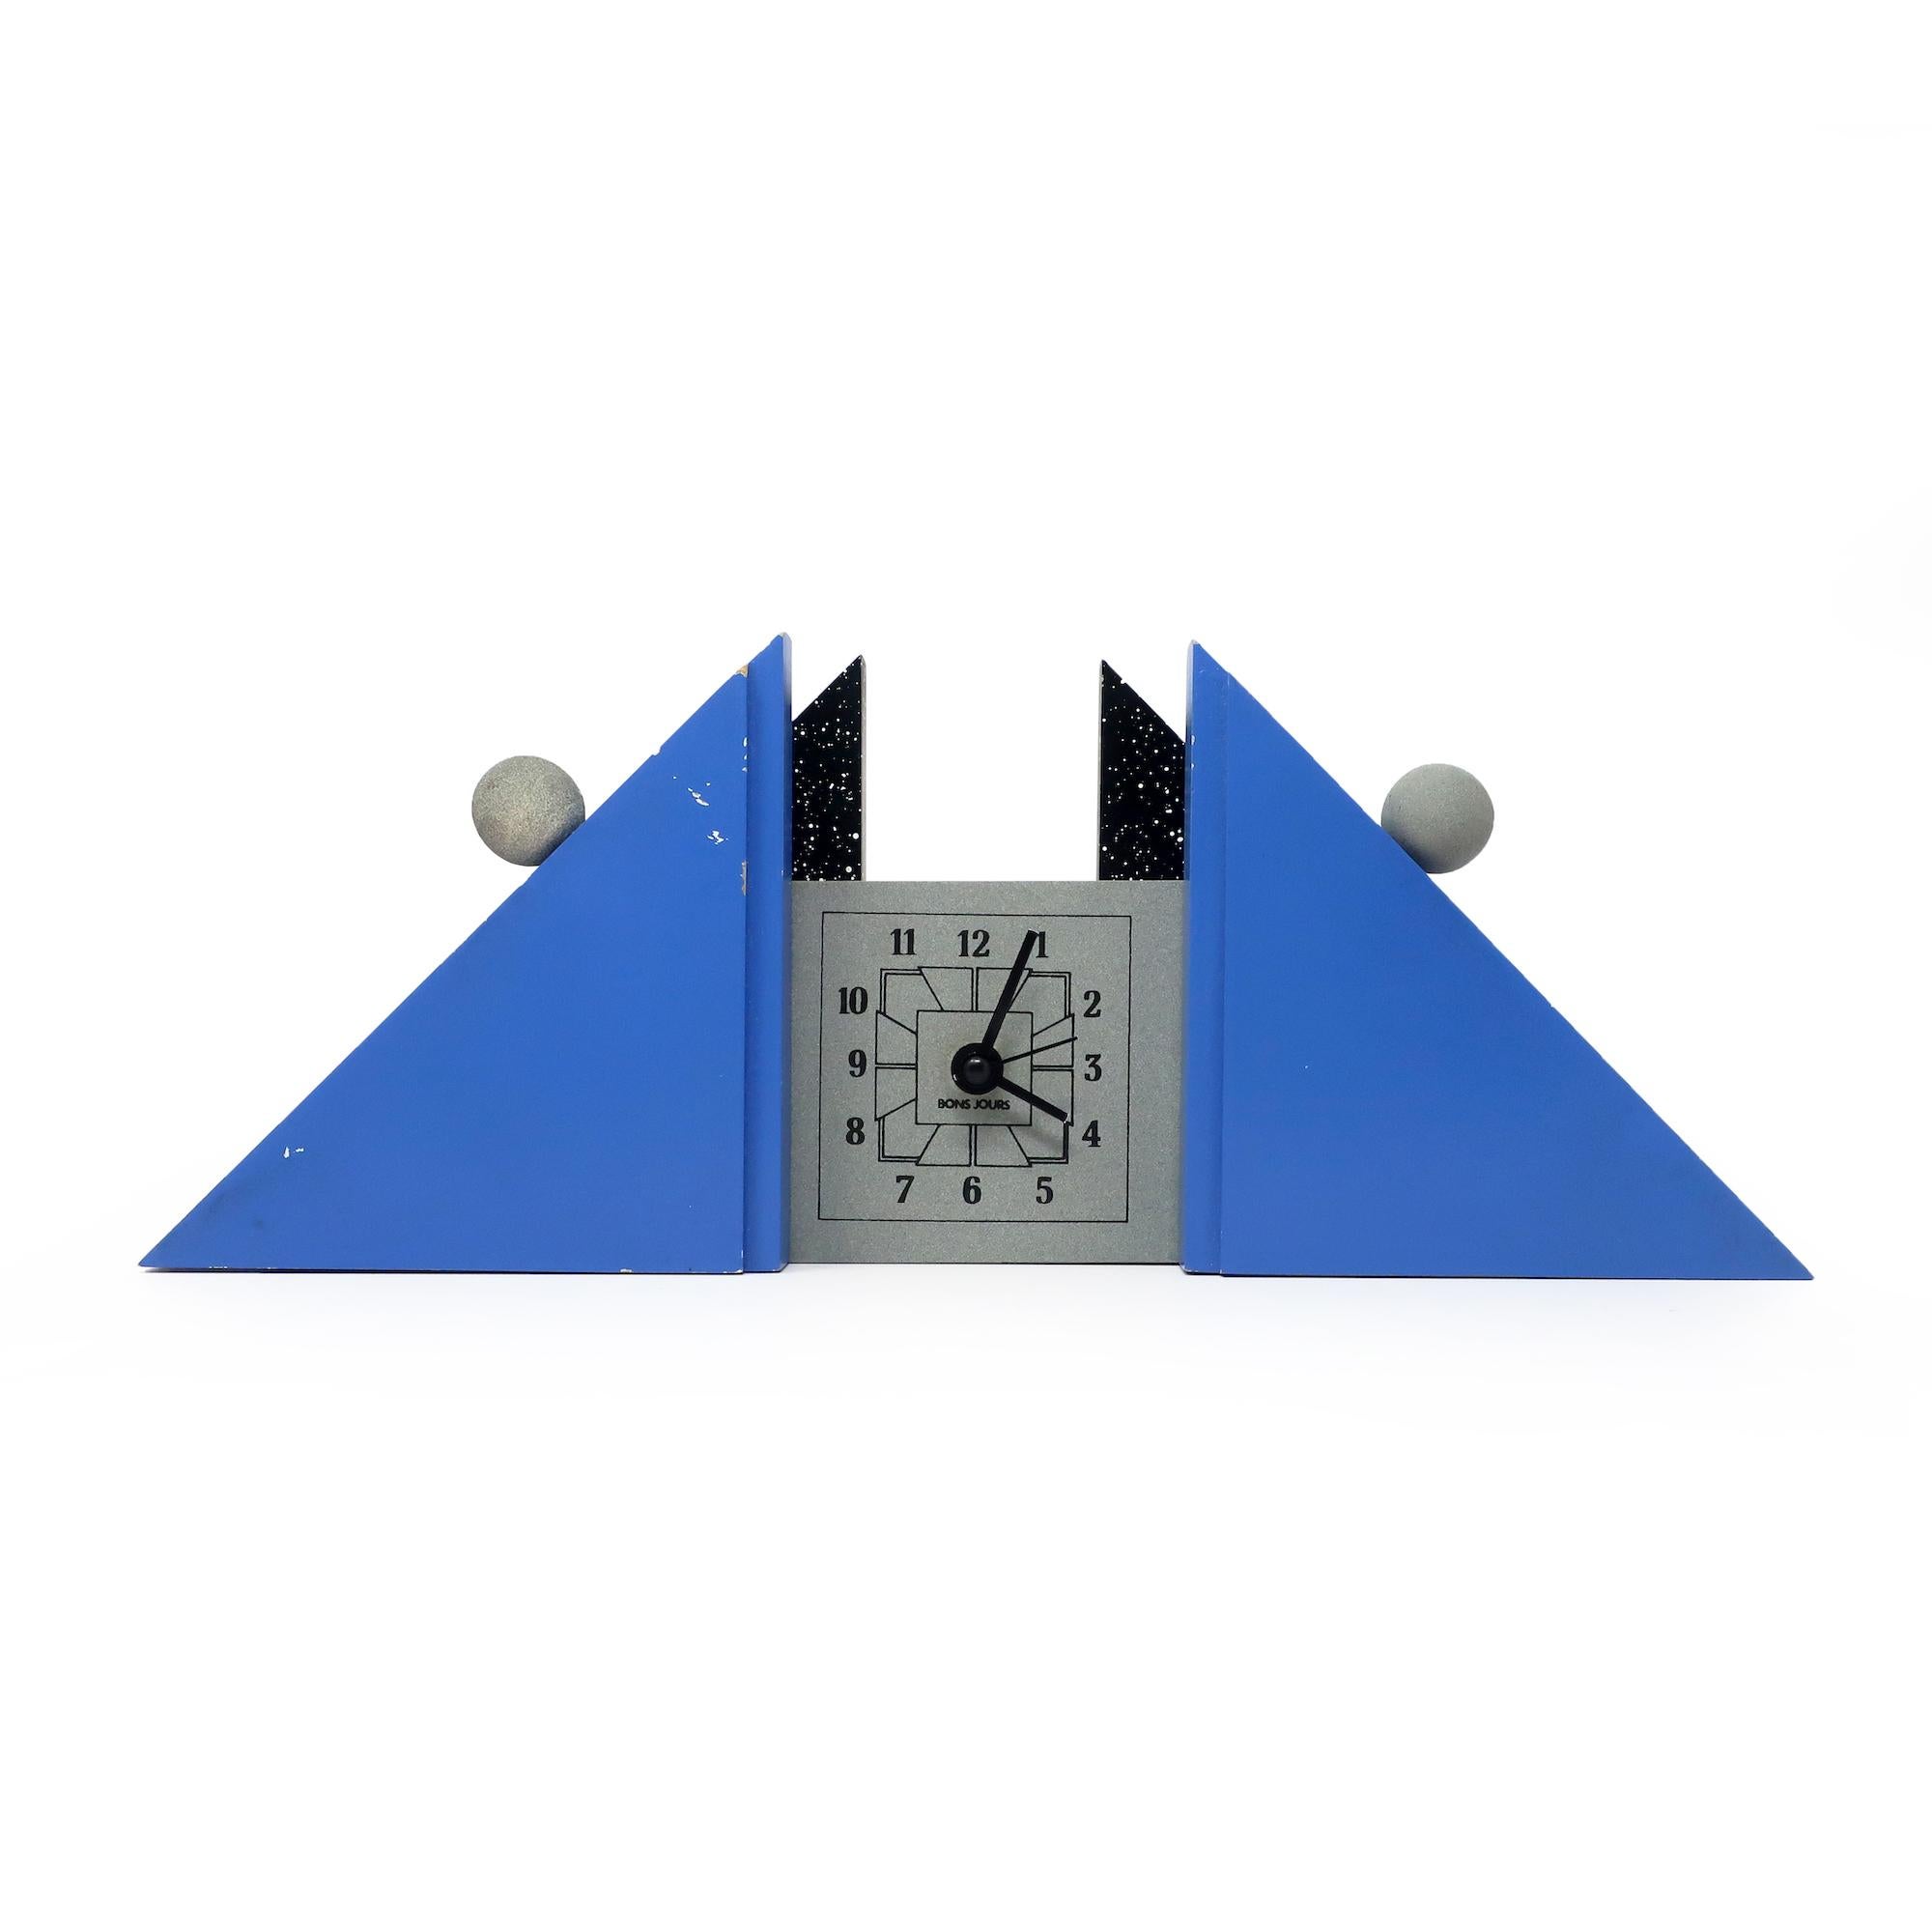 A sculptural French postmodern mantel clock with blue and splatter painted supports, gray face and accents, and black numbers and hands.  A fantastically contrasting low triangular shape with round details and a beautifully three dimensionality. 